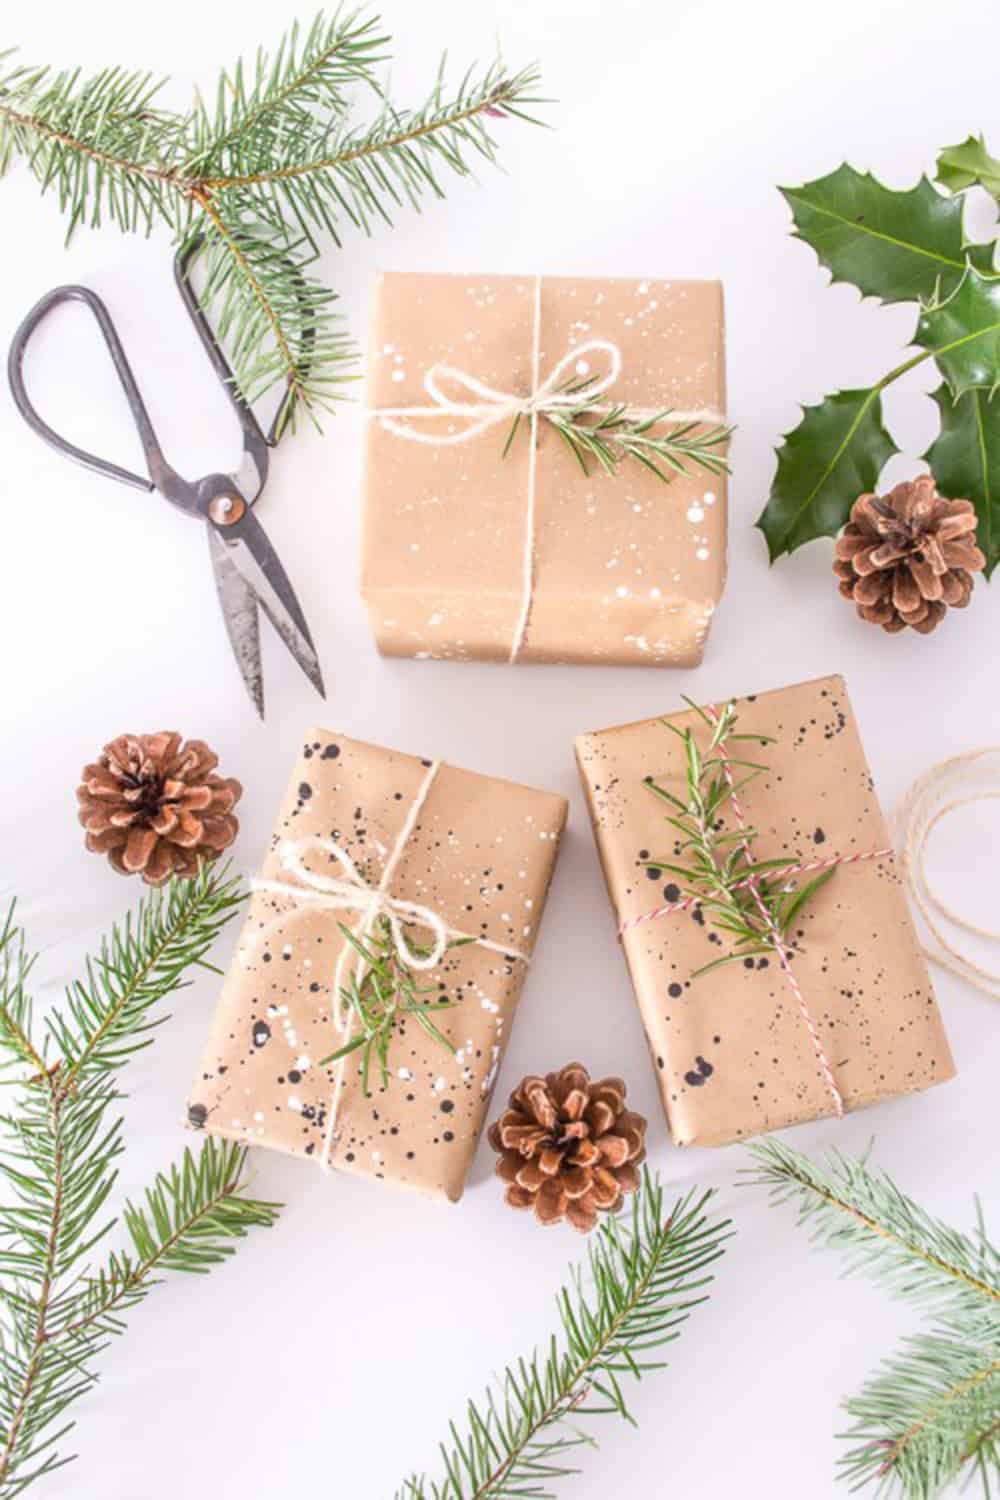 10+ DIY to wrap gifts with craft paper